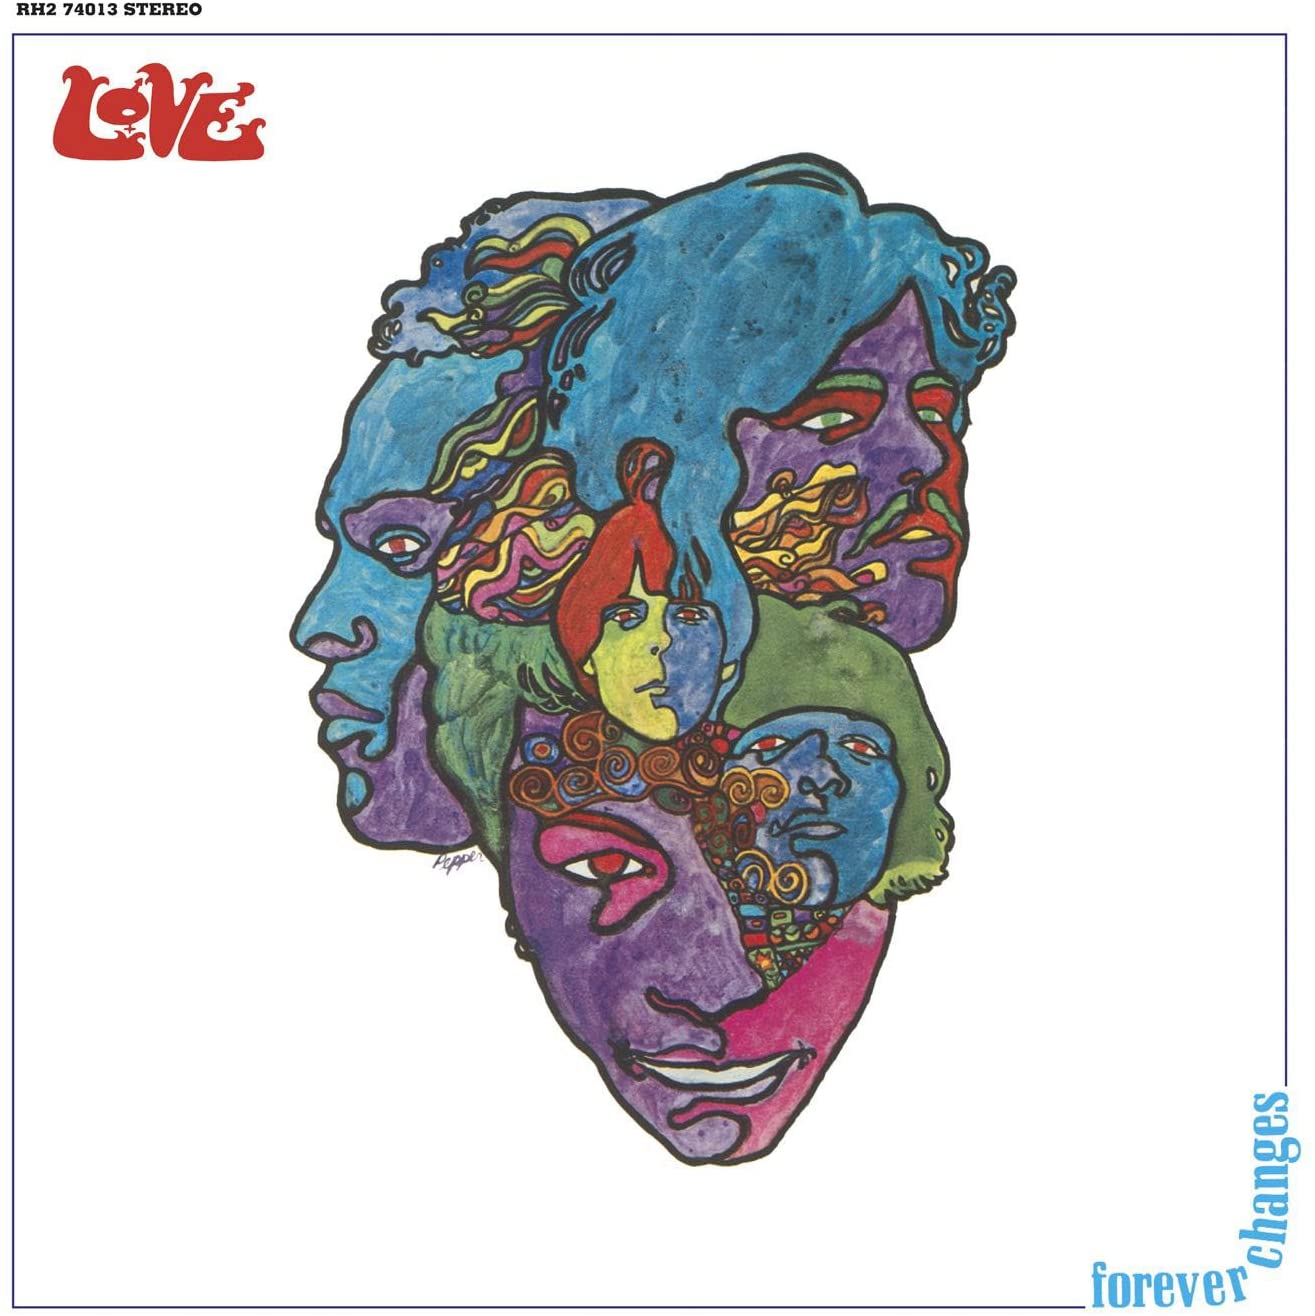 Iconic 60s album on Vinyl from Arthur Lee and Love.